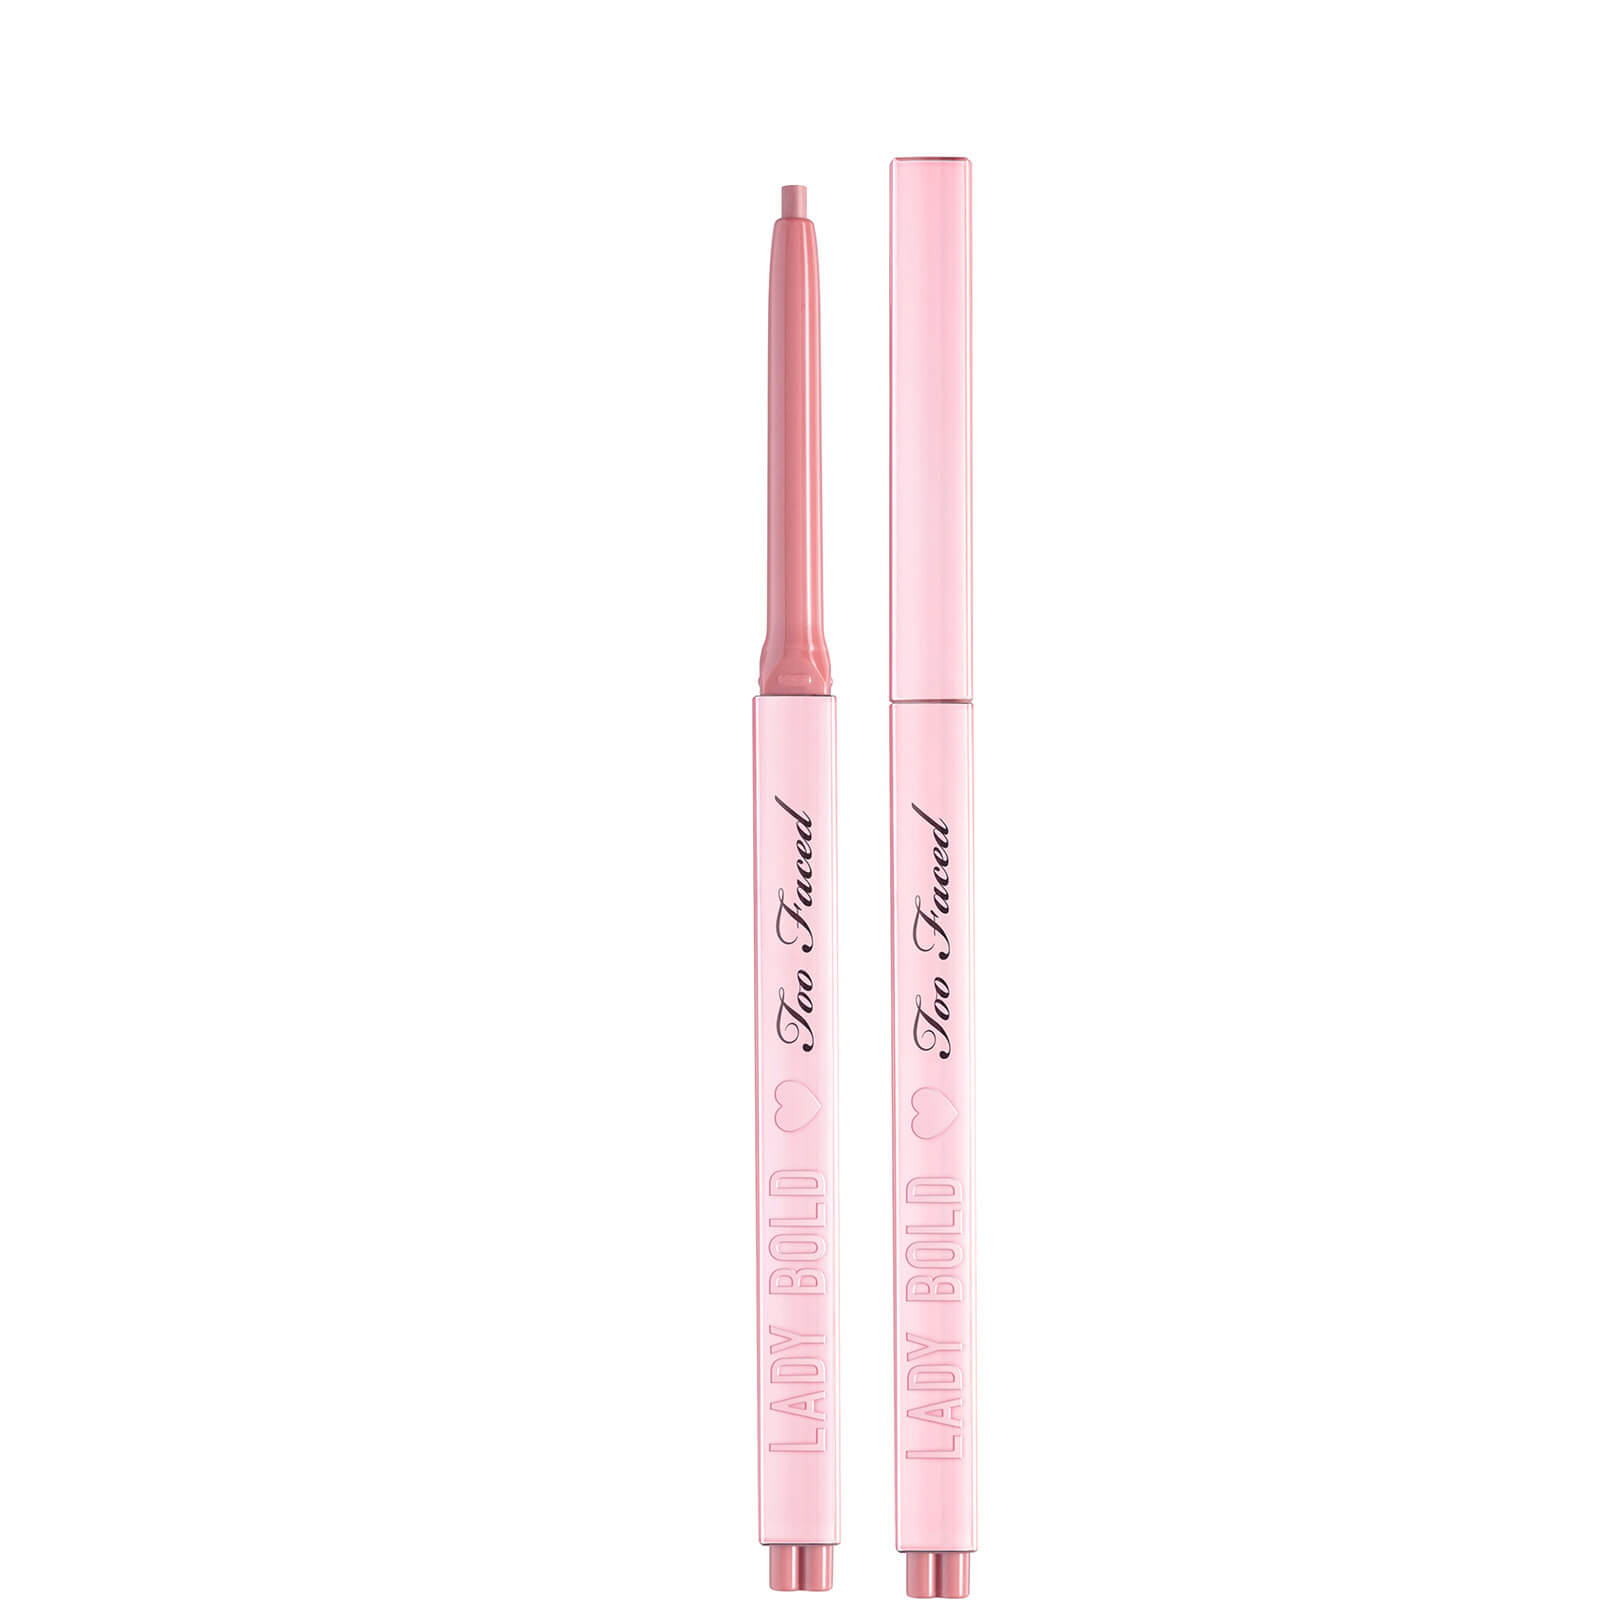 Too Faced Lady Bold Demi-Matte Lip Liner 0.23g (Various Shades) - Lead The Way